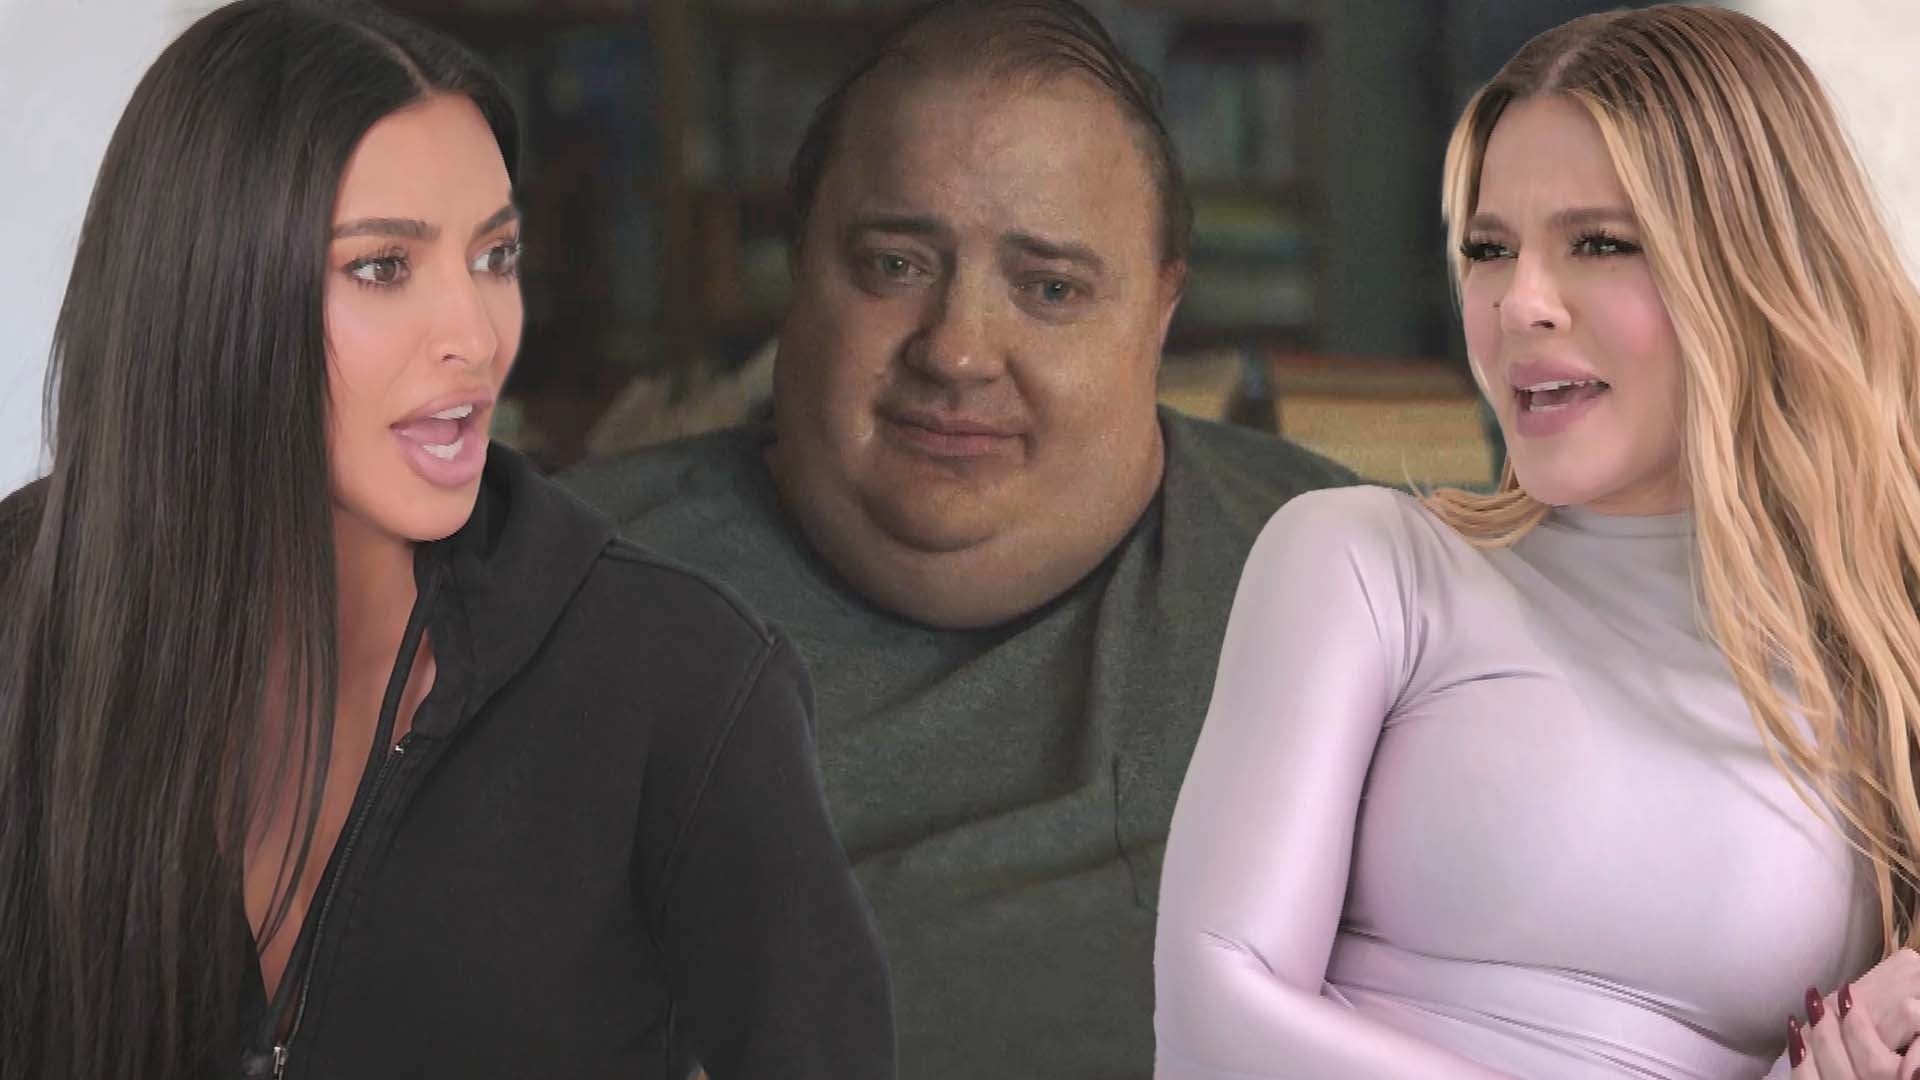 Kim Kardashian Compares Sister Khloé to Brendan Fraser's Character in 'The Whale' 